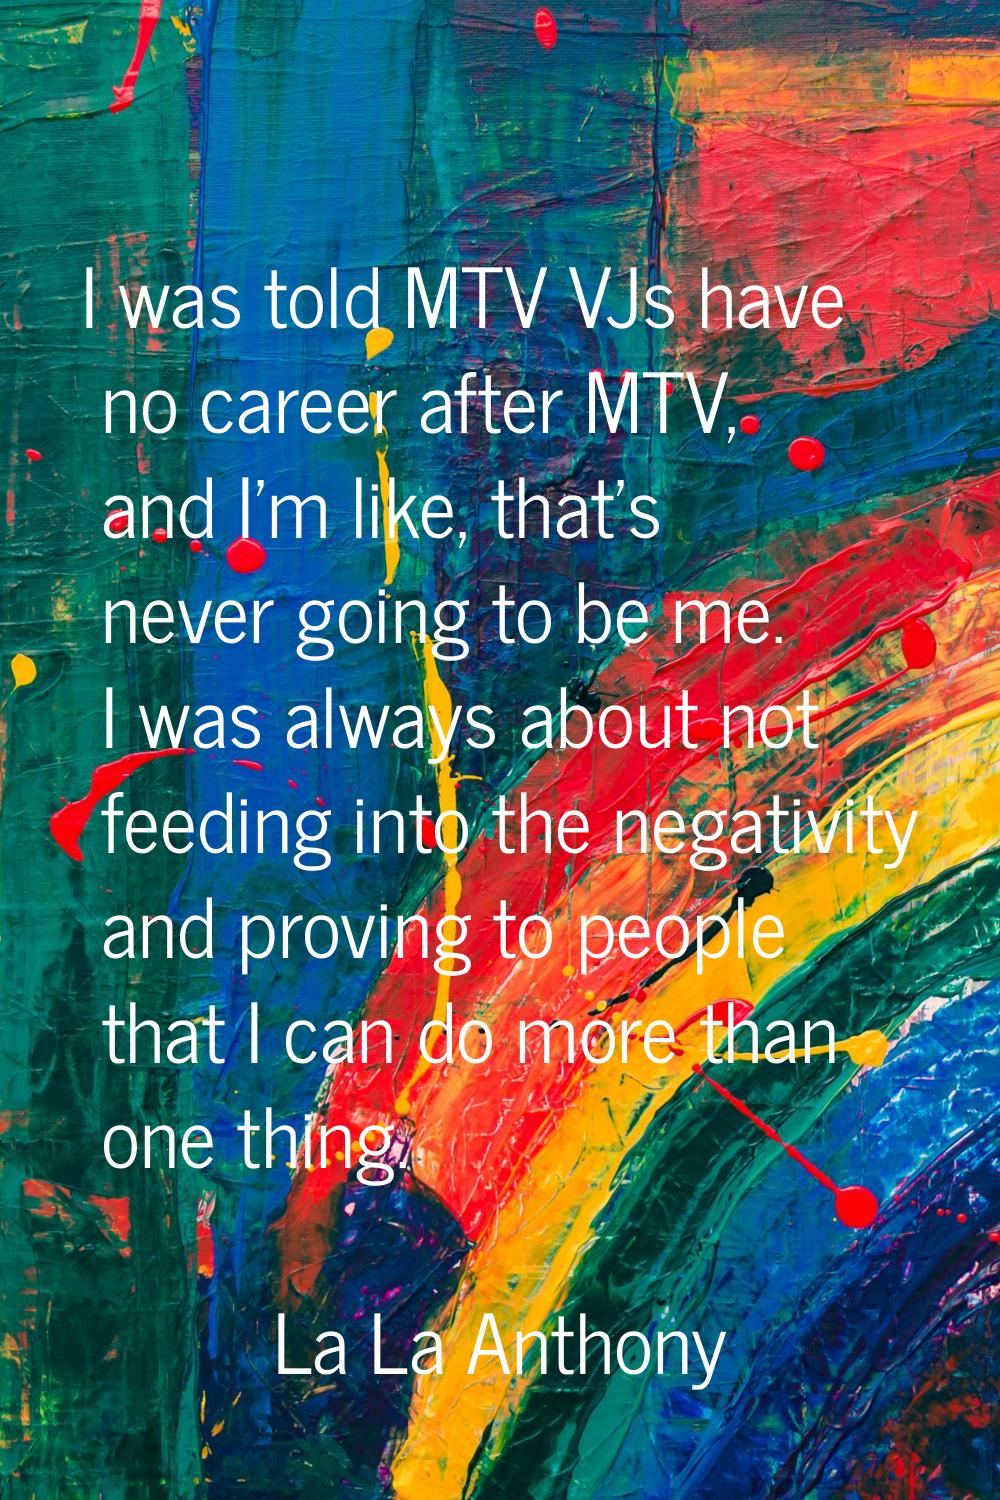 I was told MTV VJs have no career after MTV, and I'm like, that's never going to be me. I was alway